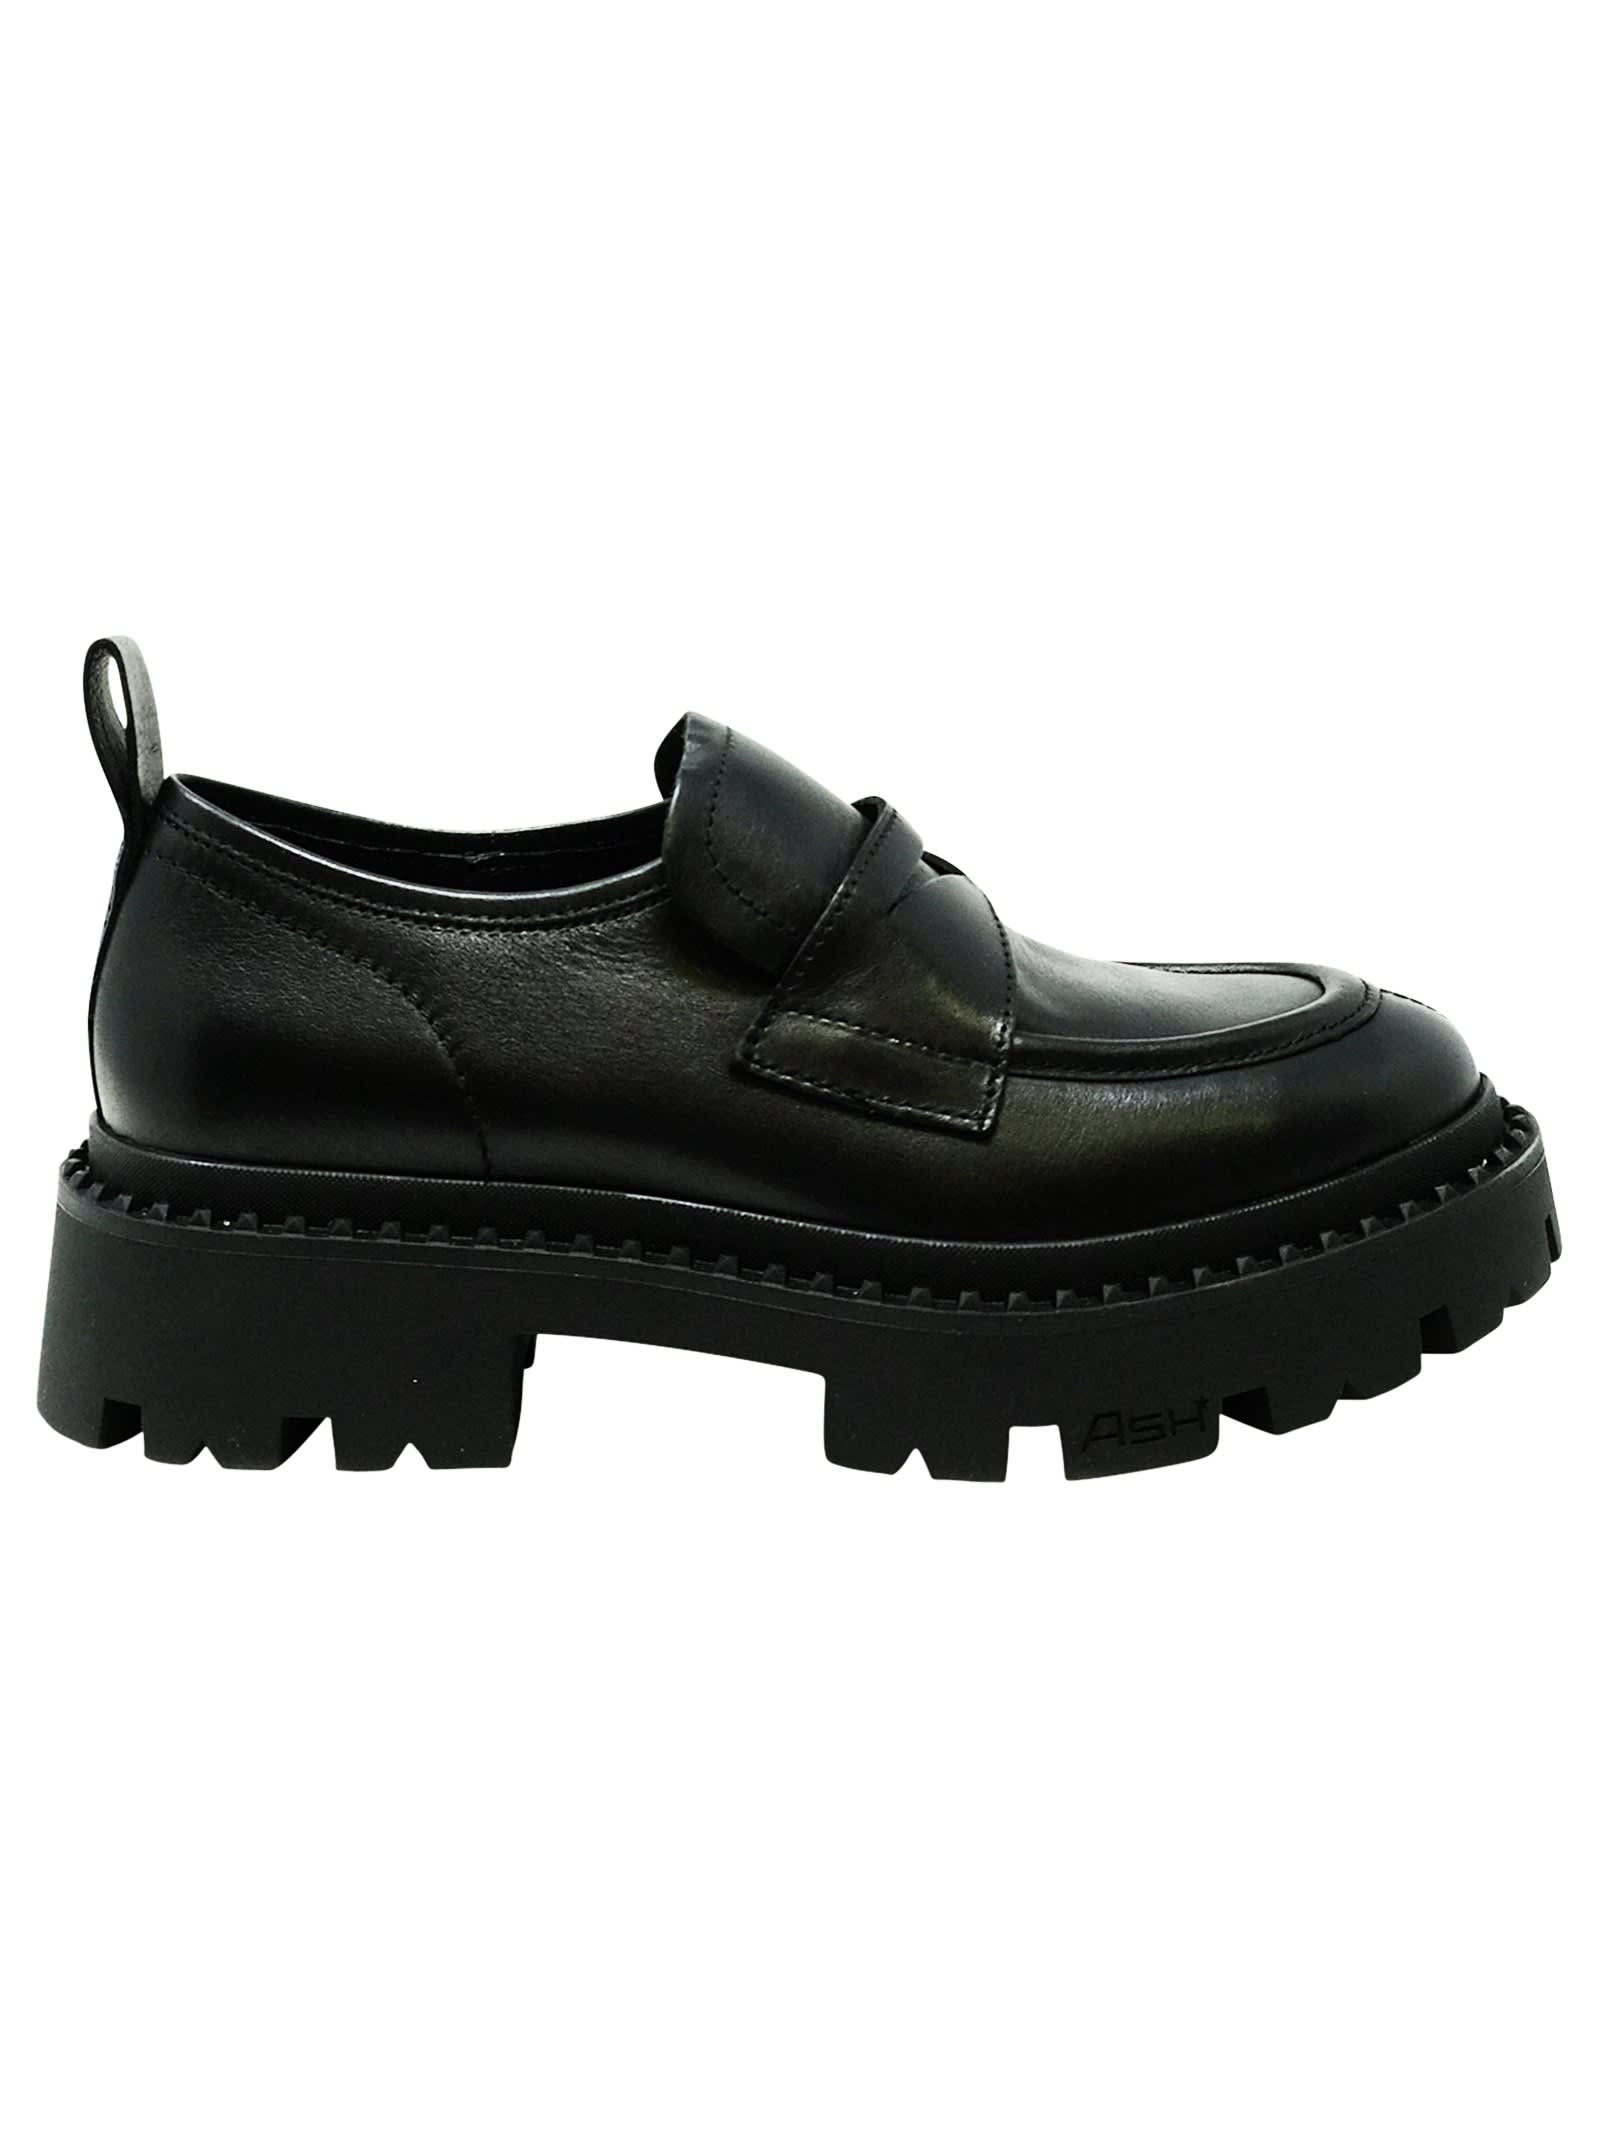 Ash Black Leather Genial Loafers